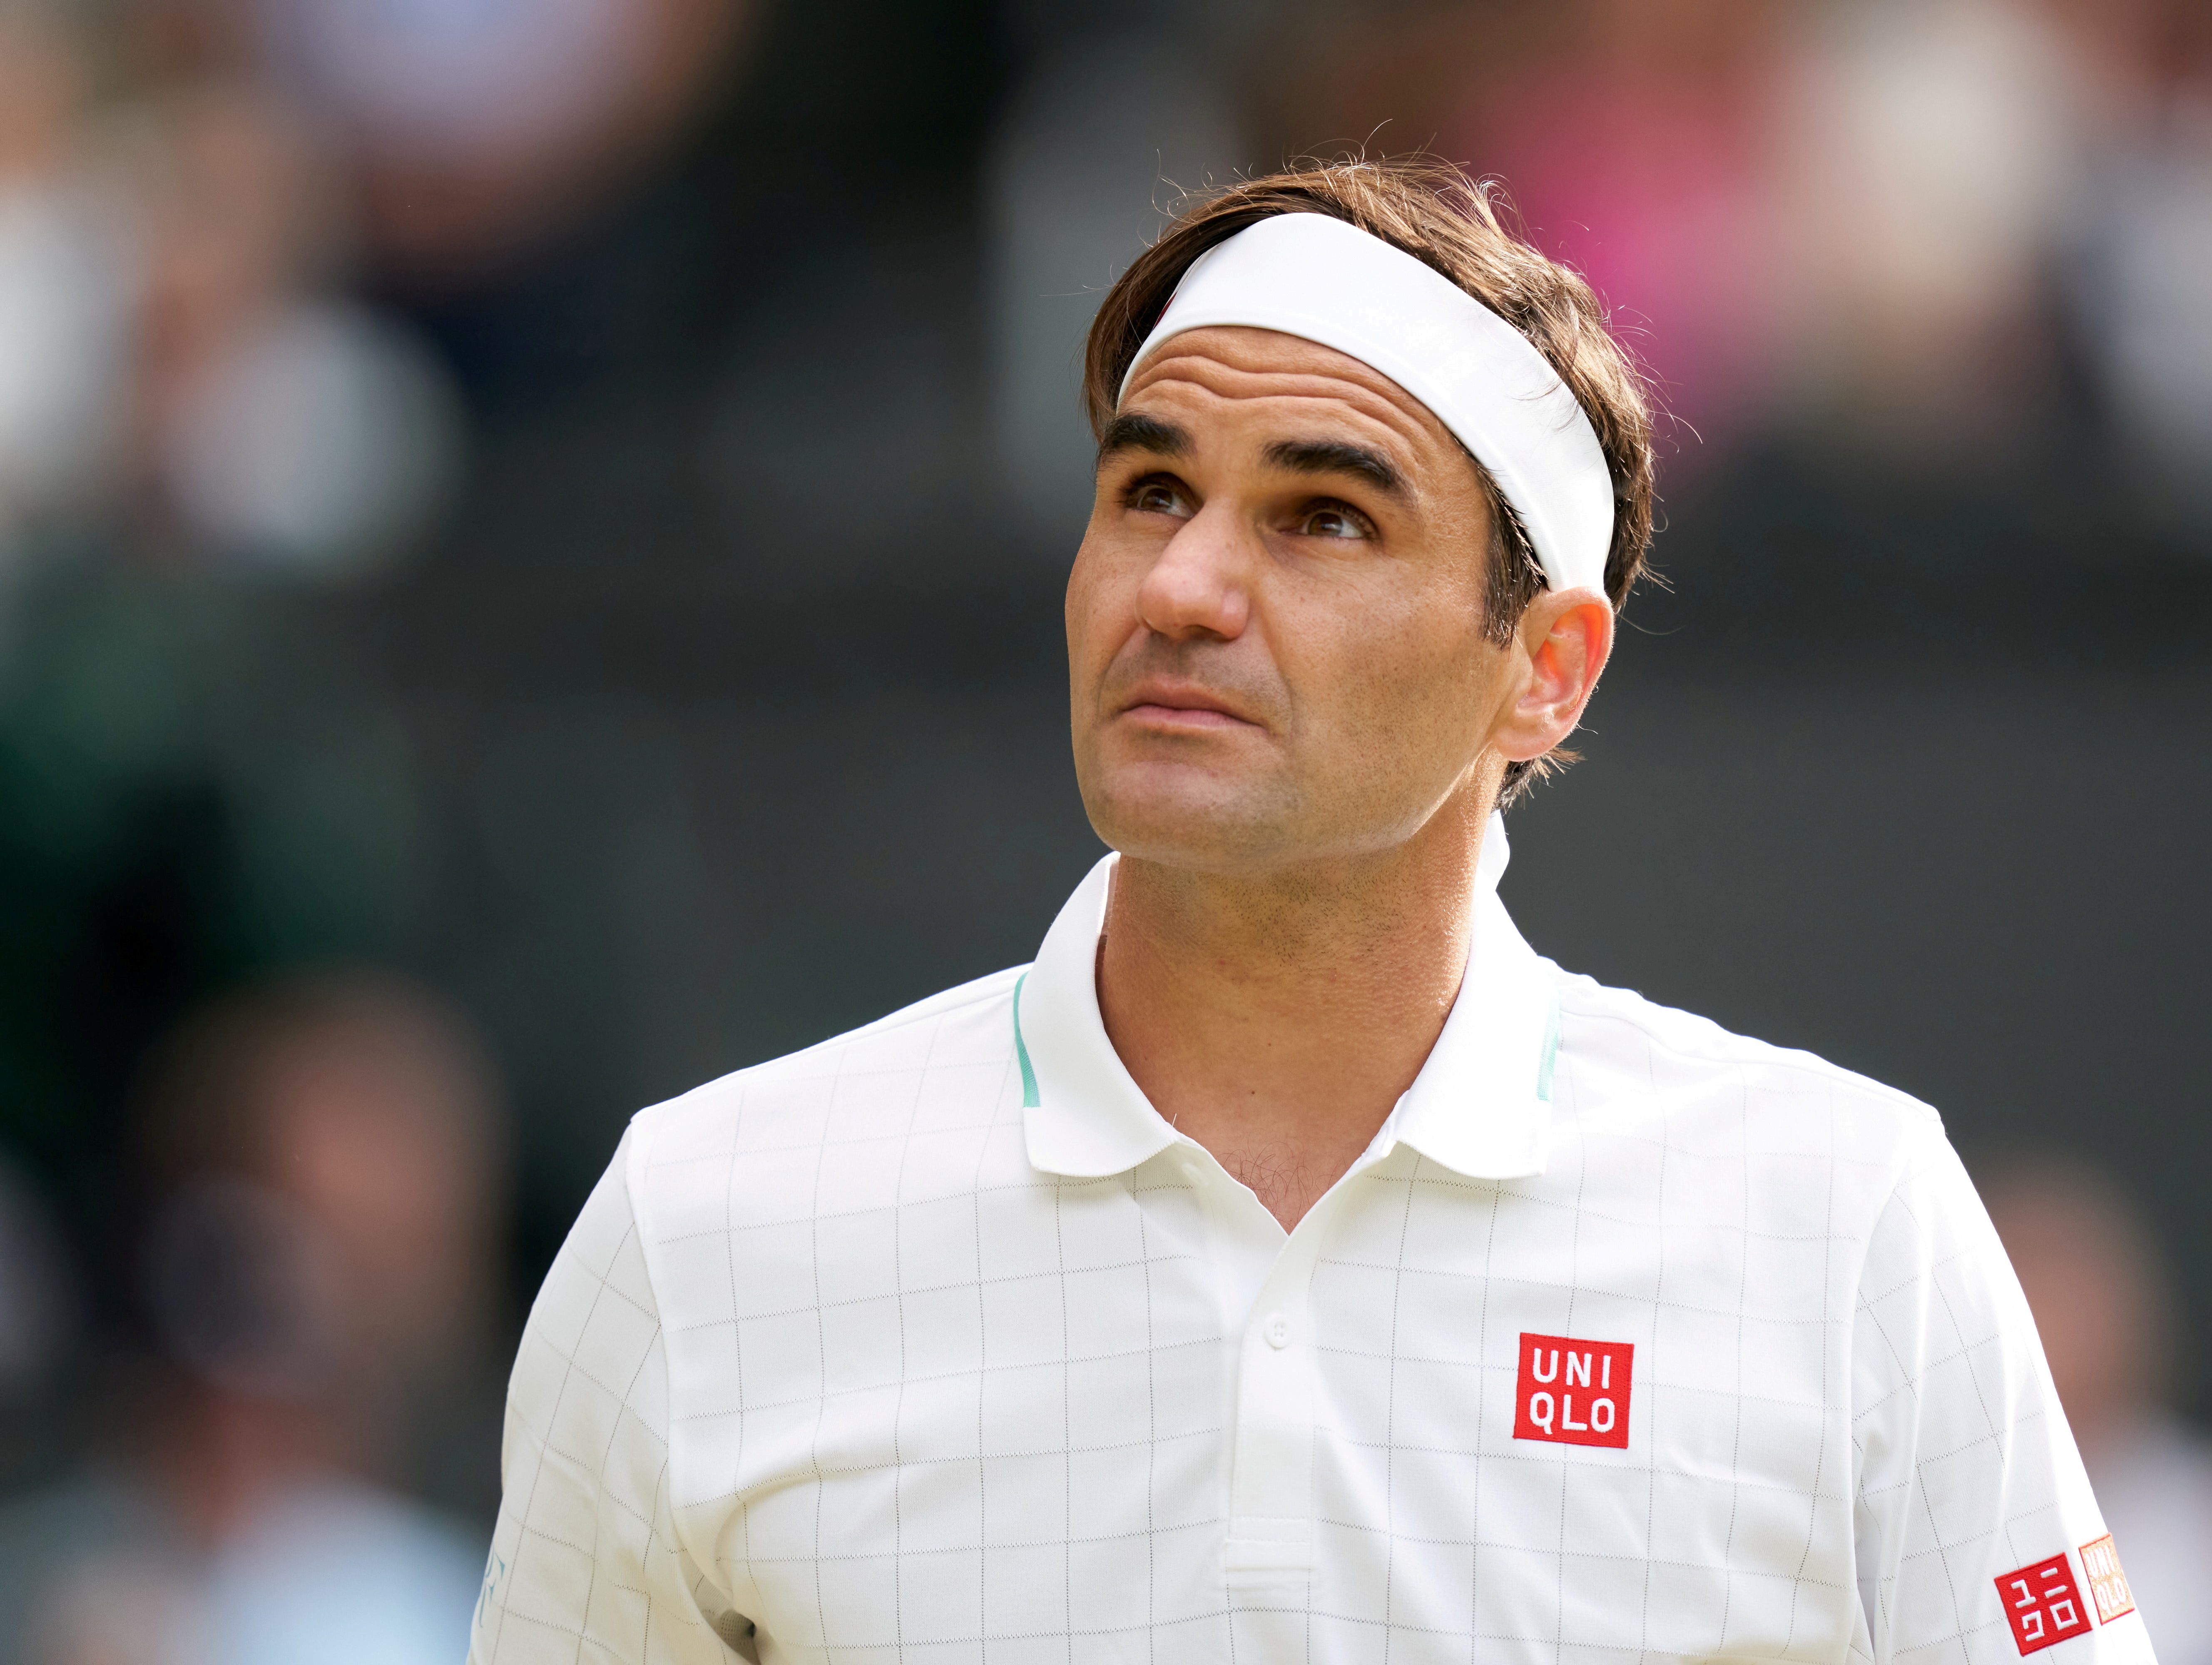 Federer to have knee surgery, has ‘glimmer of hope’ for return